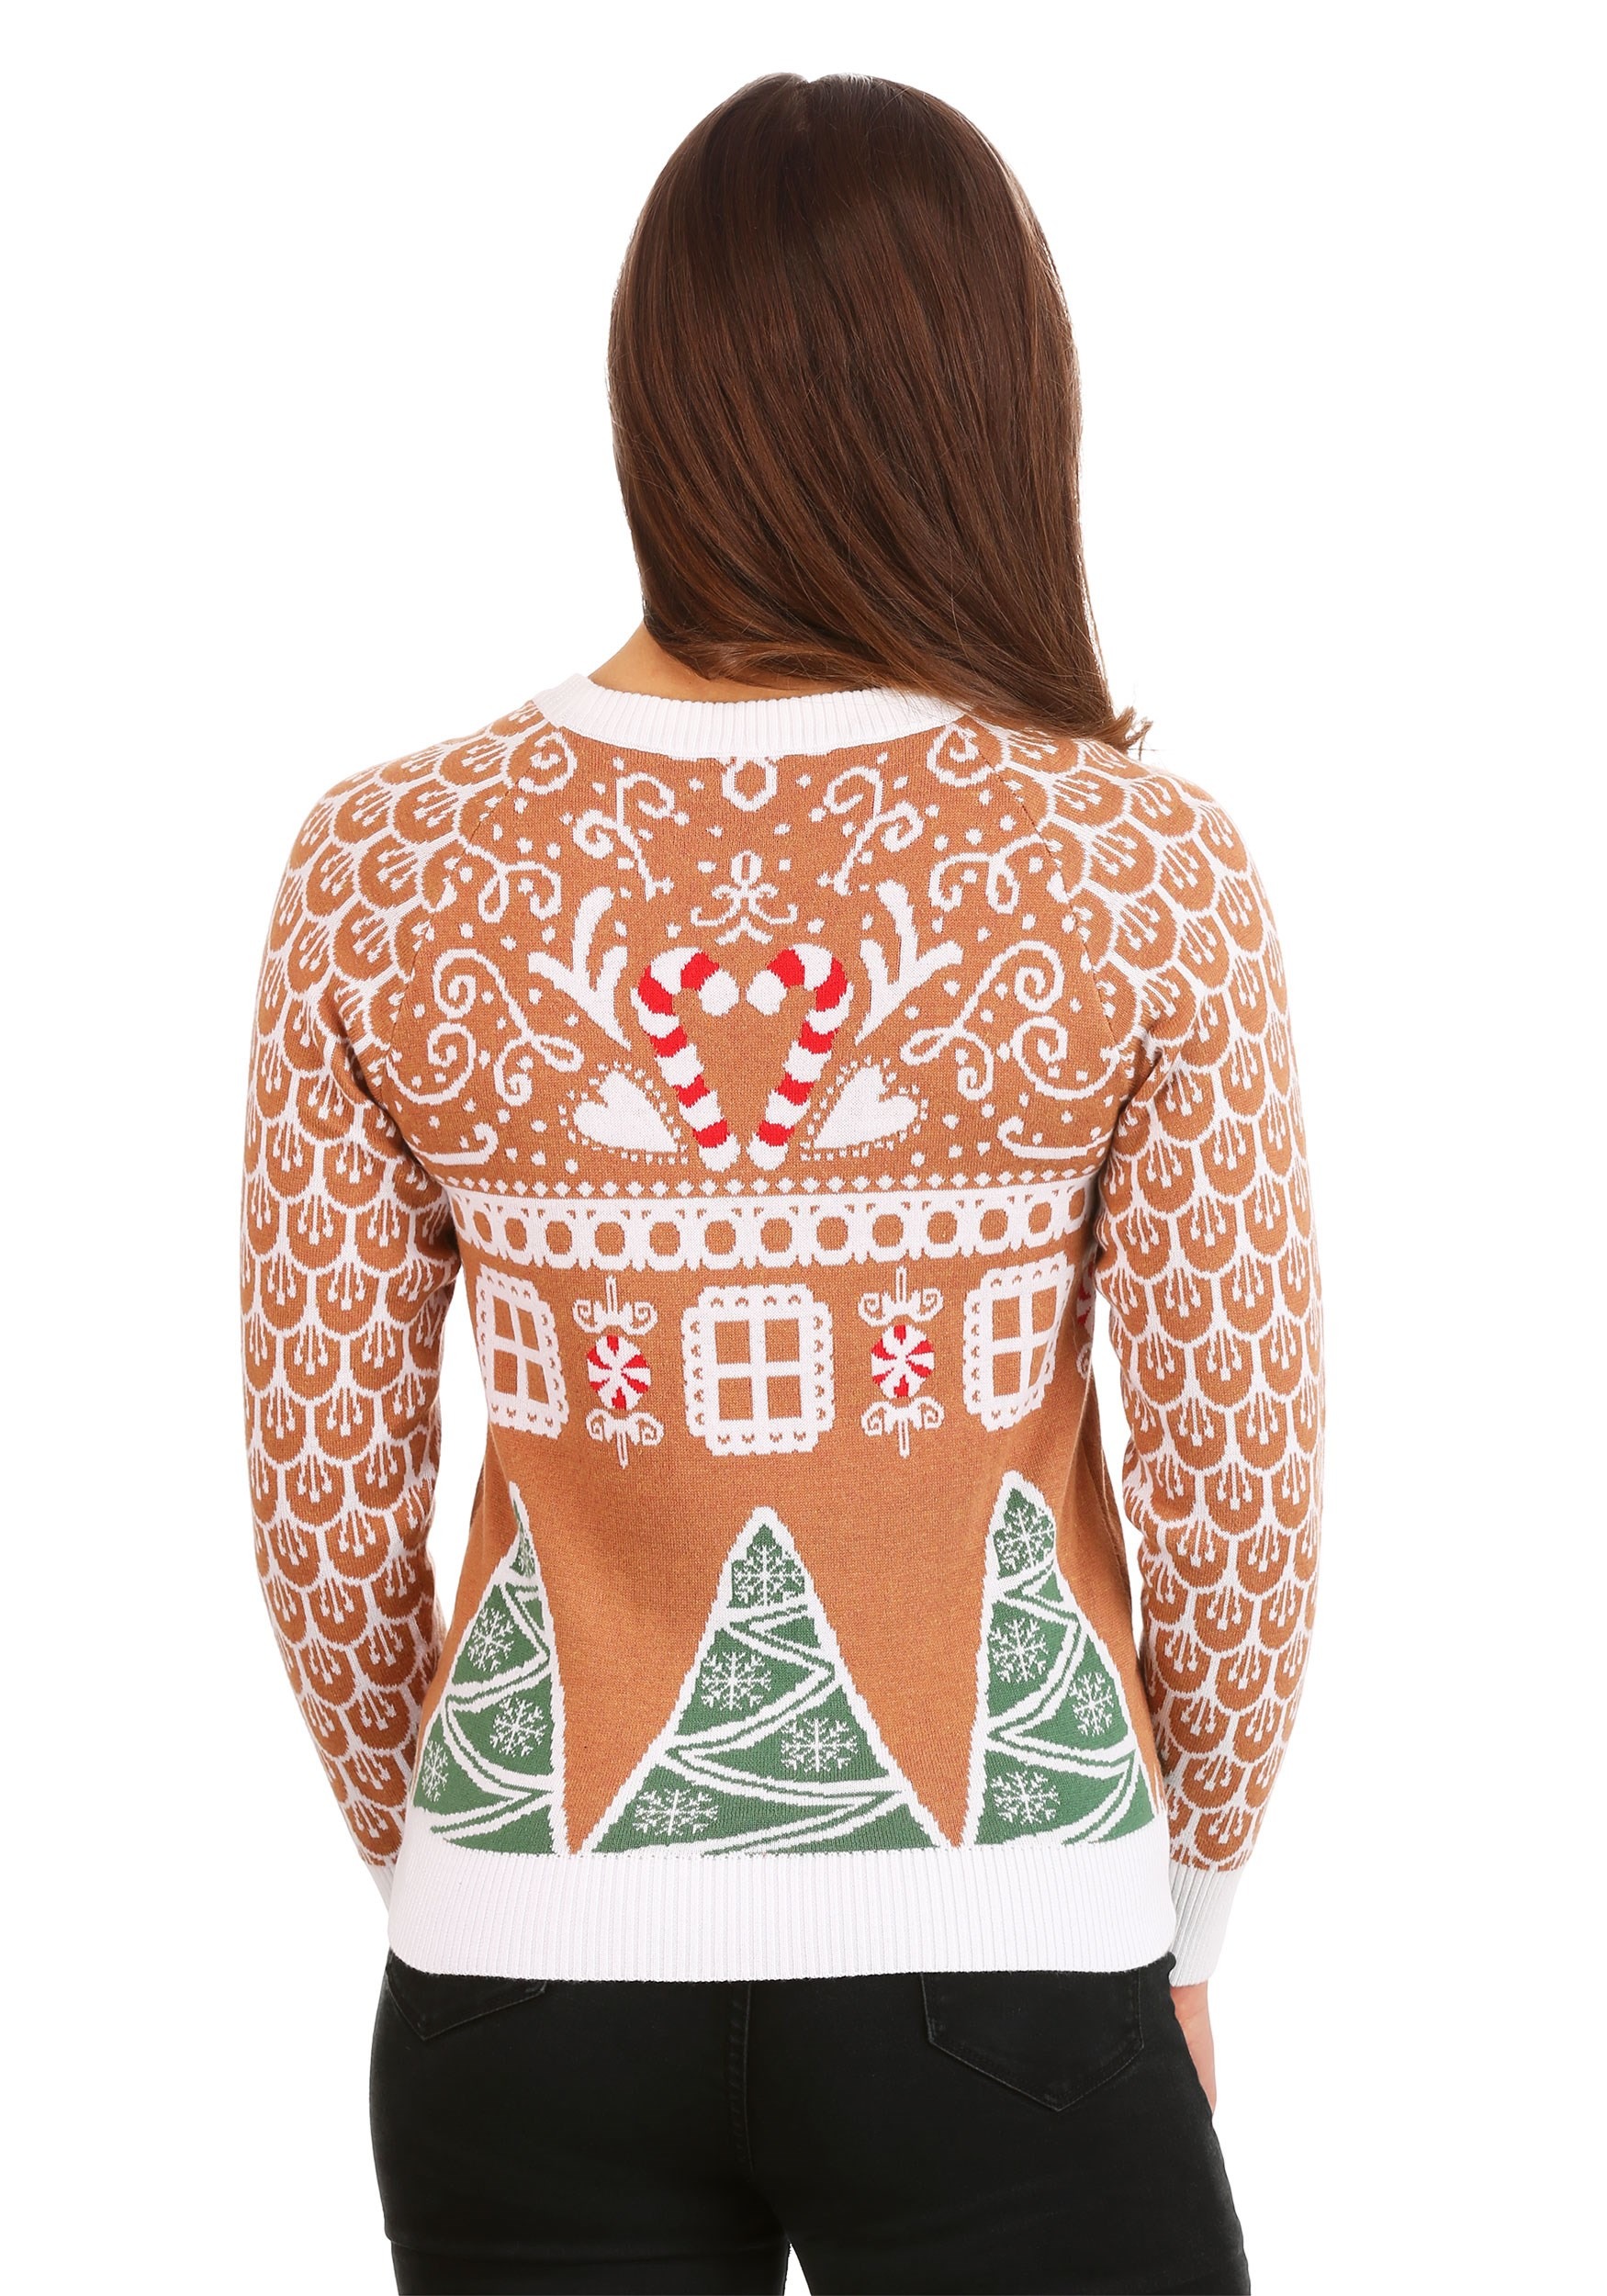 Angry Gingerbread Ugly Christmas Sweater Cardigan